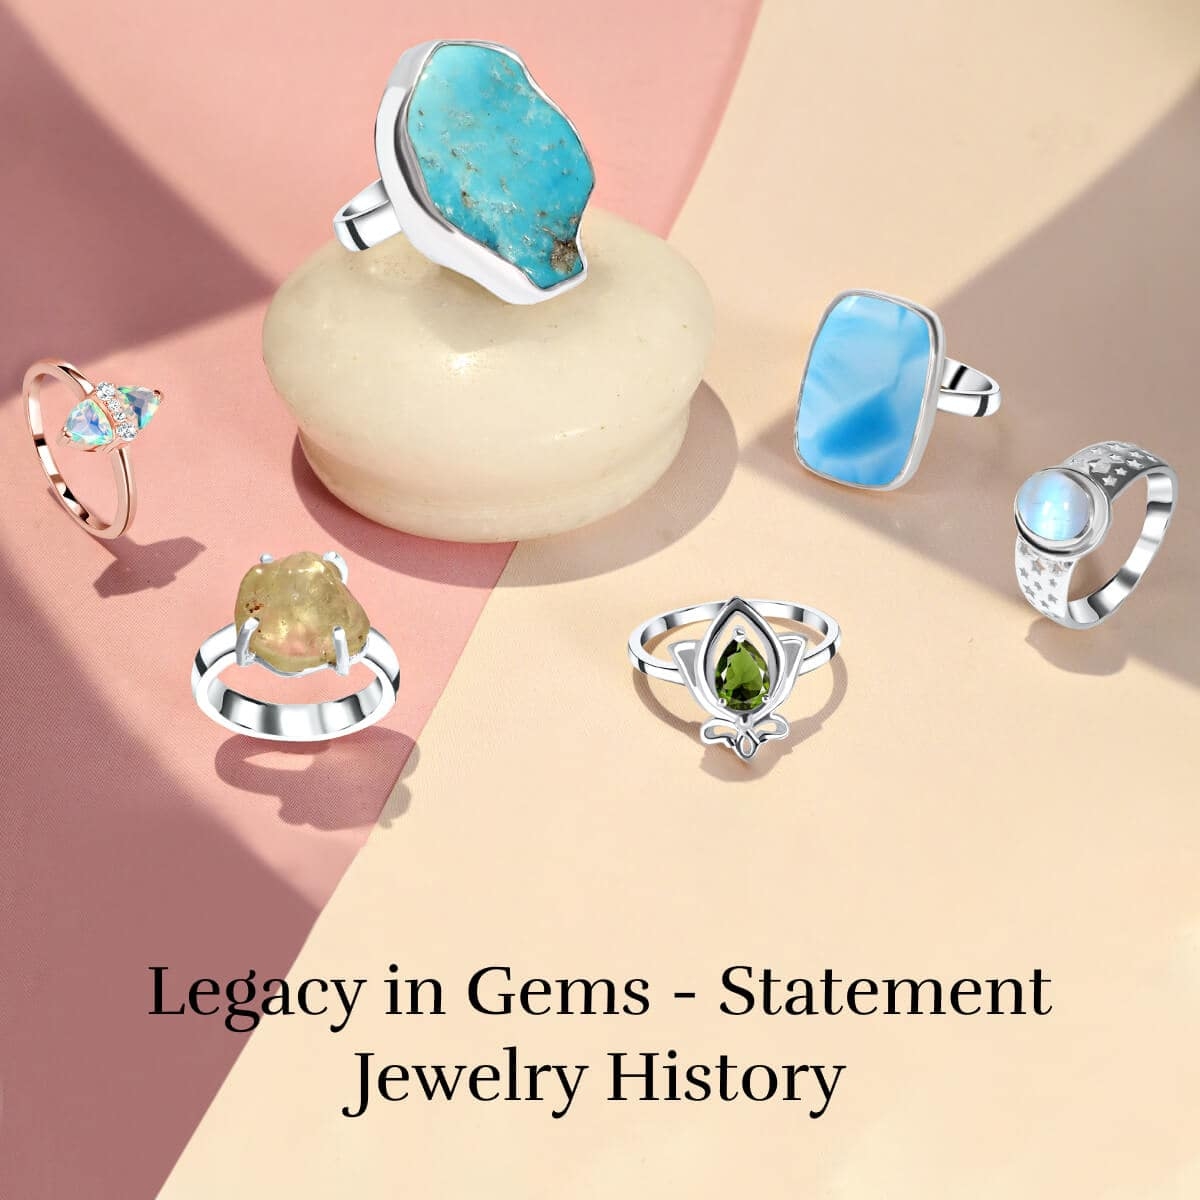 The History of Statement Jewelry